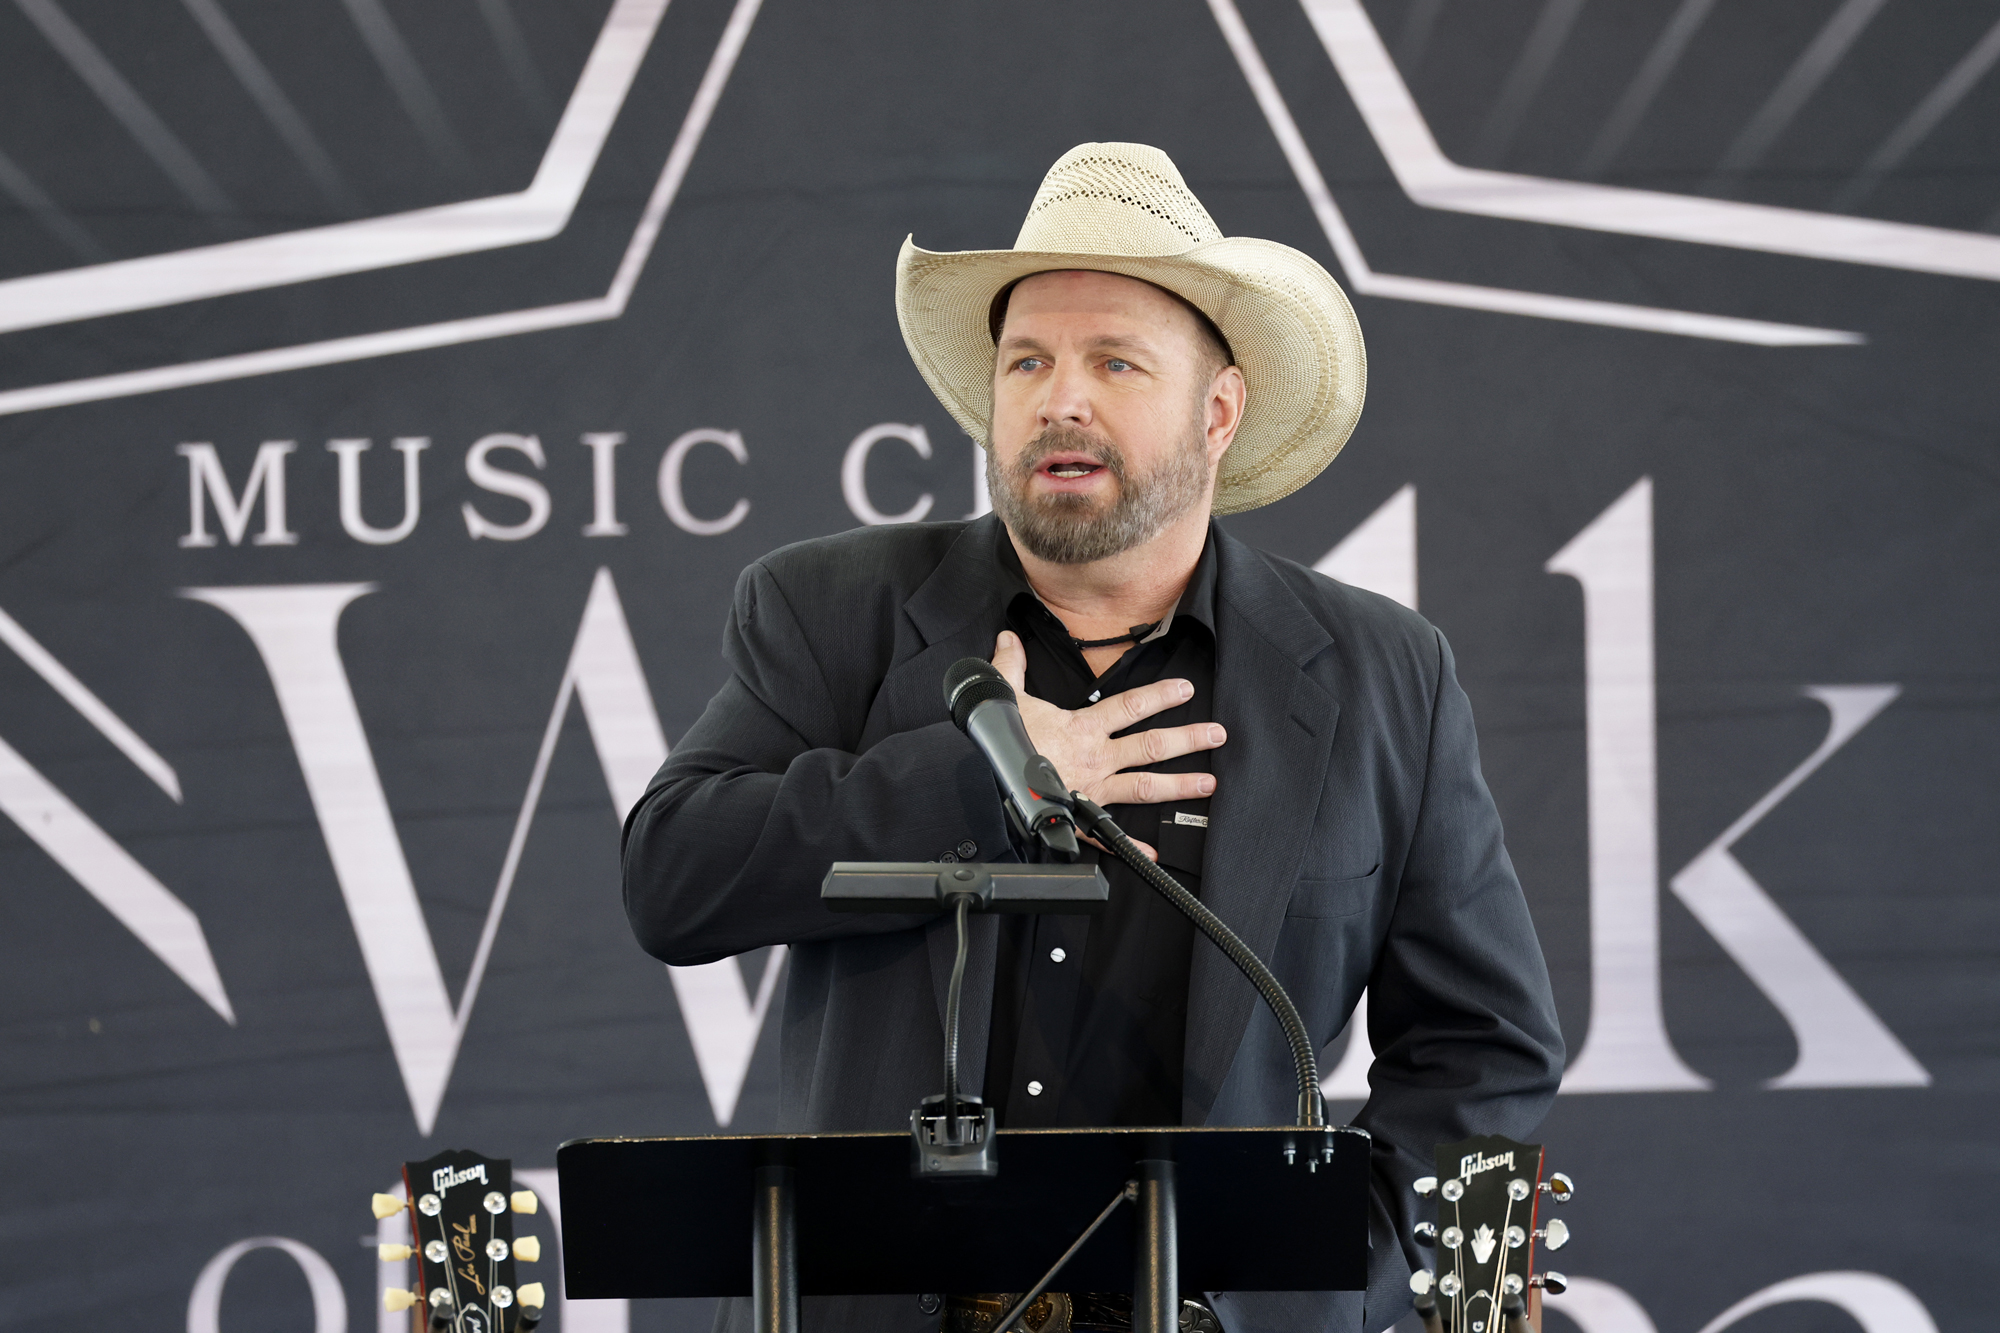 Garth Brooks Explains Why He Keeps His Songs on the Radio